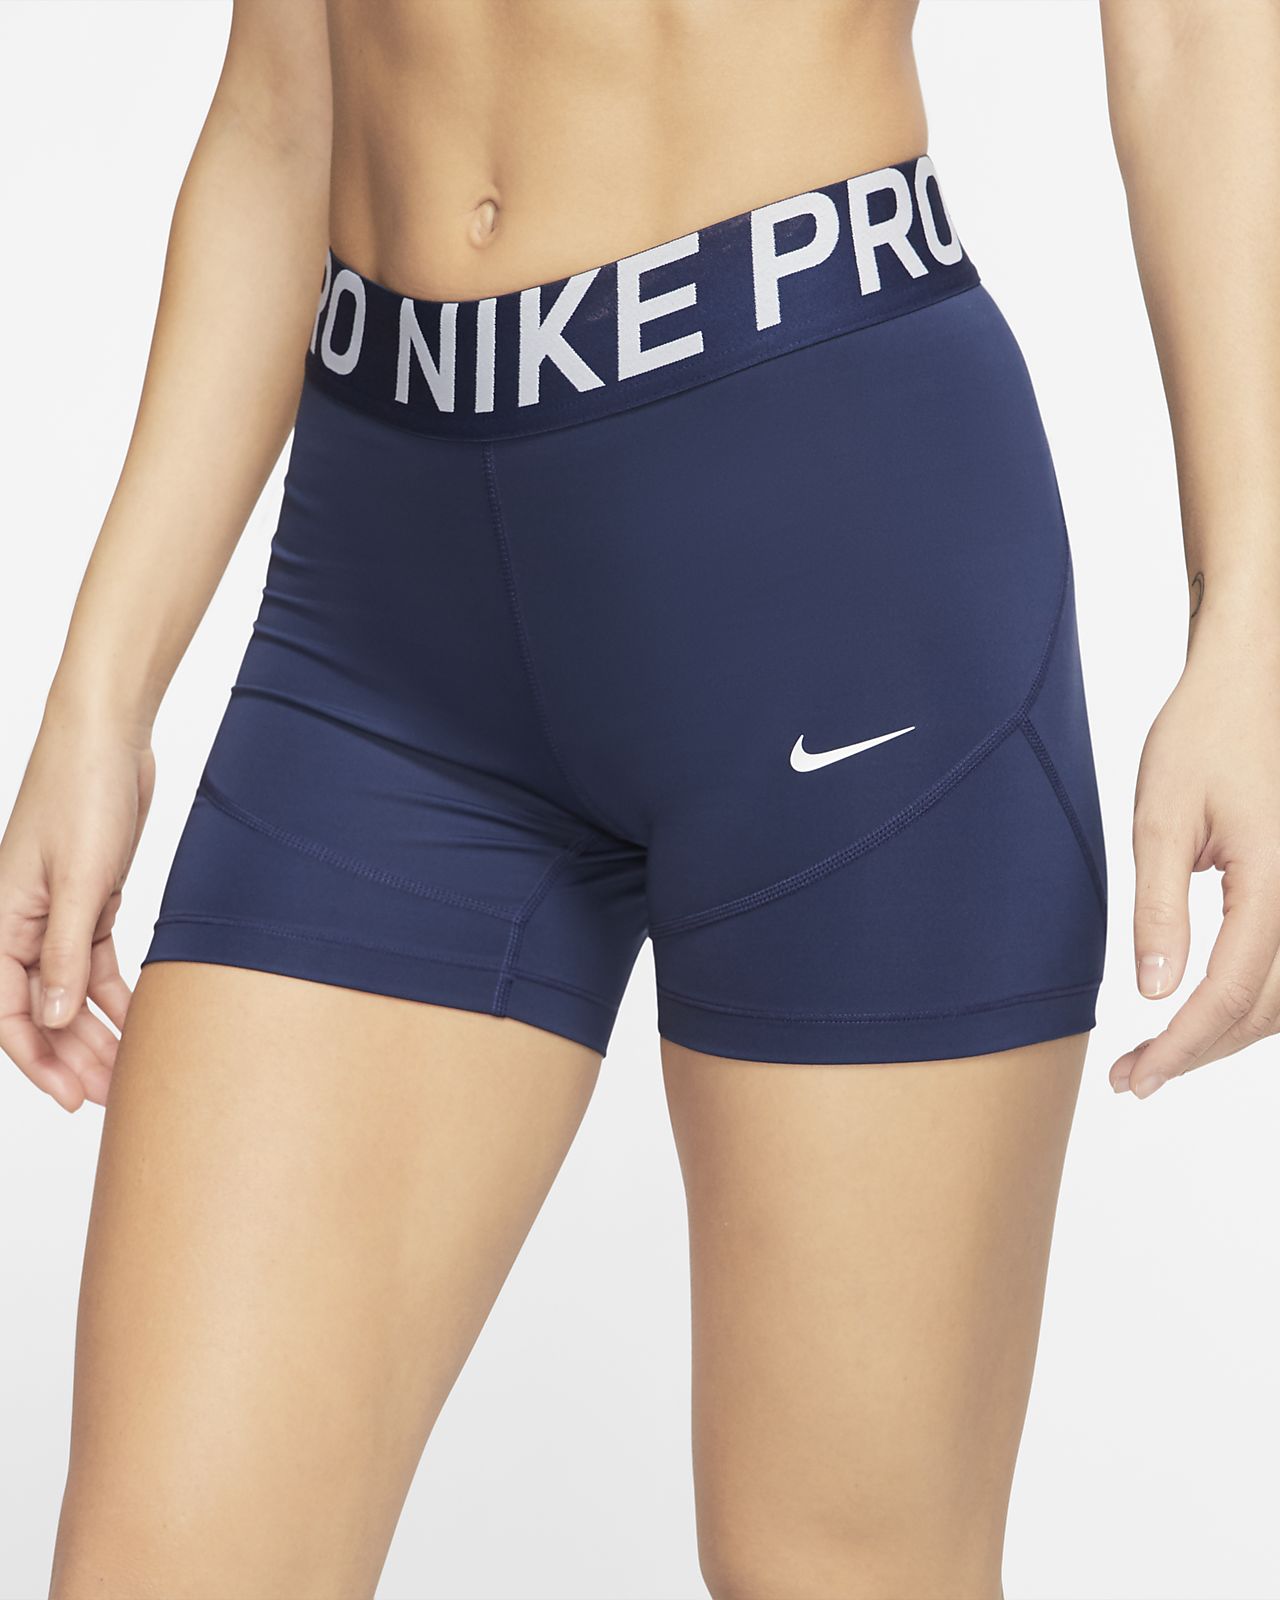 blue nike compression shorts cheap online